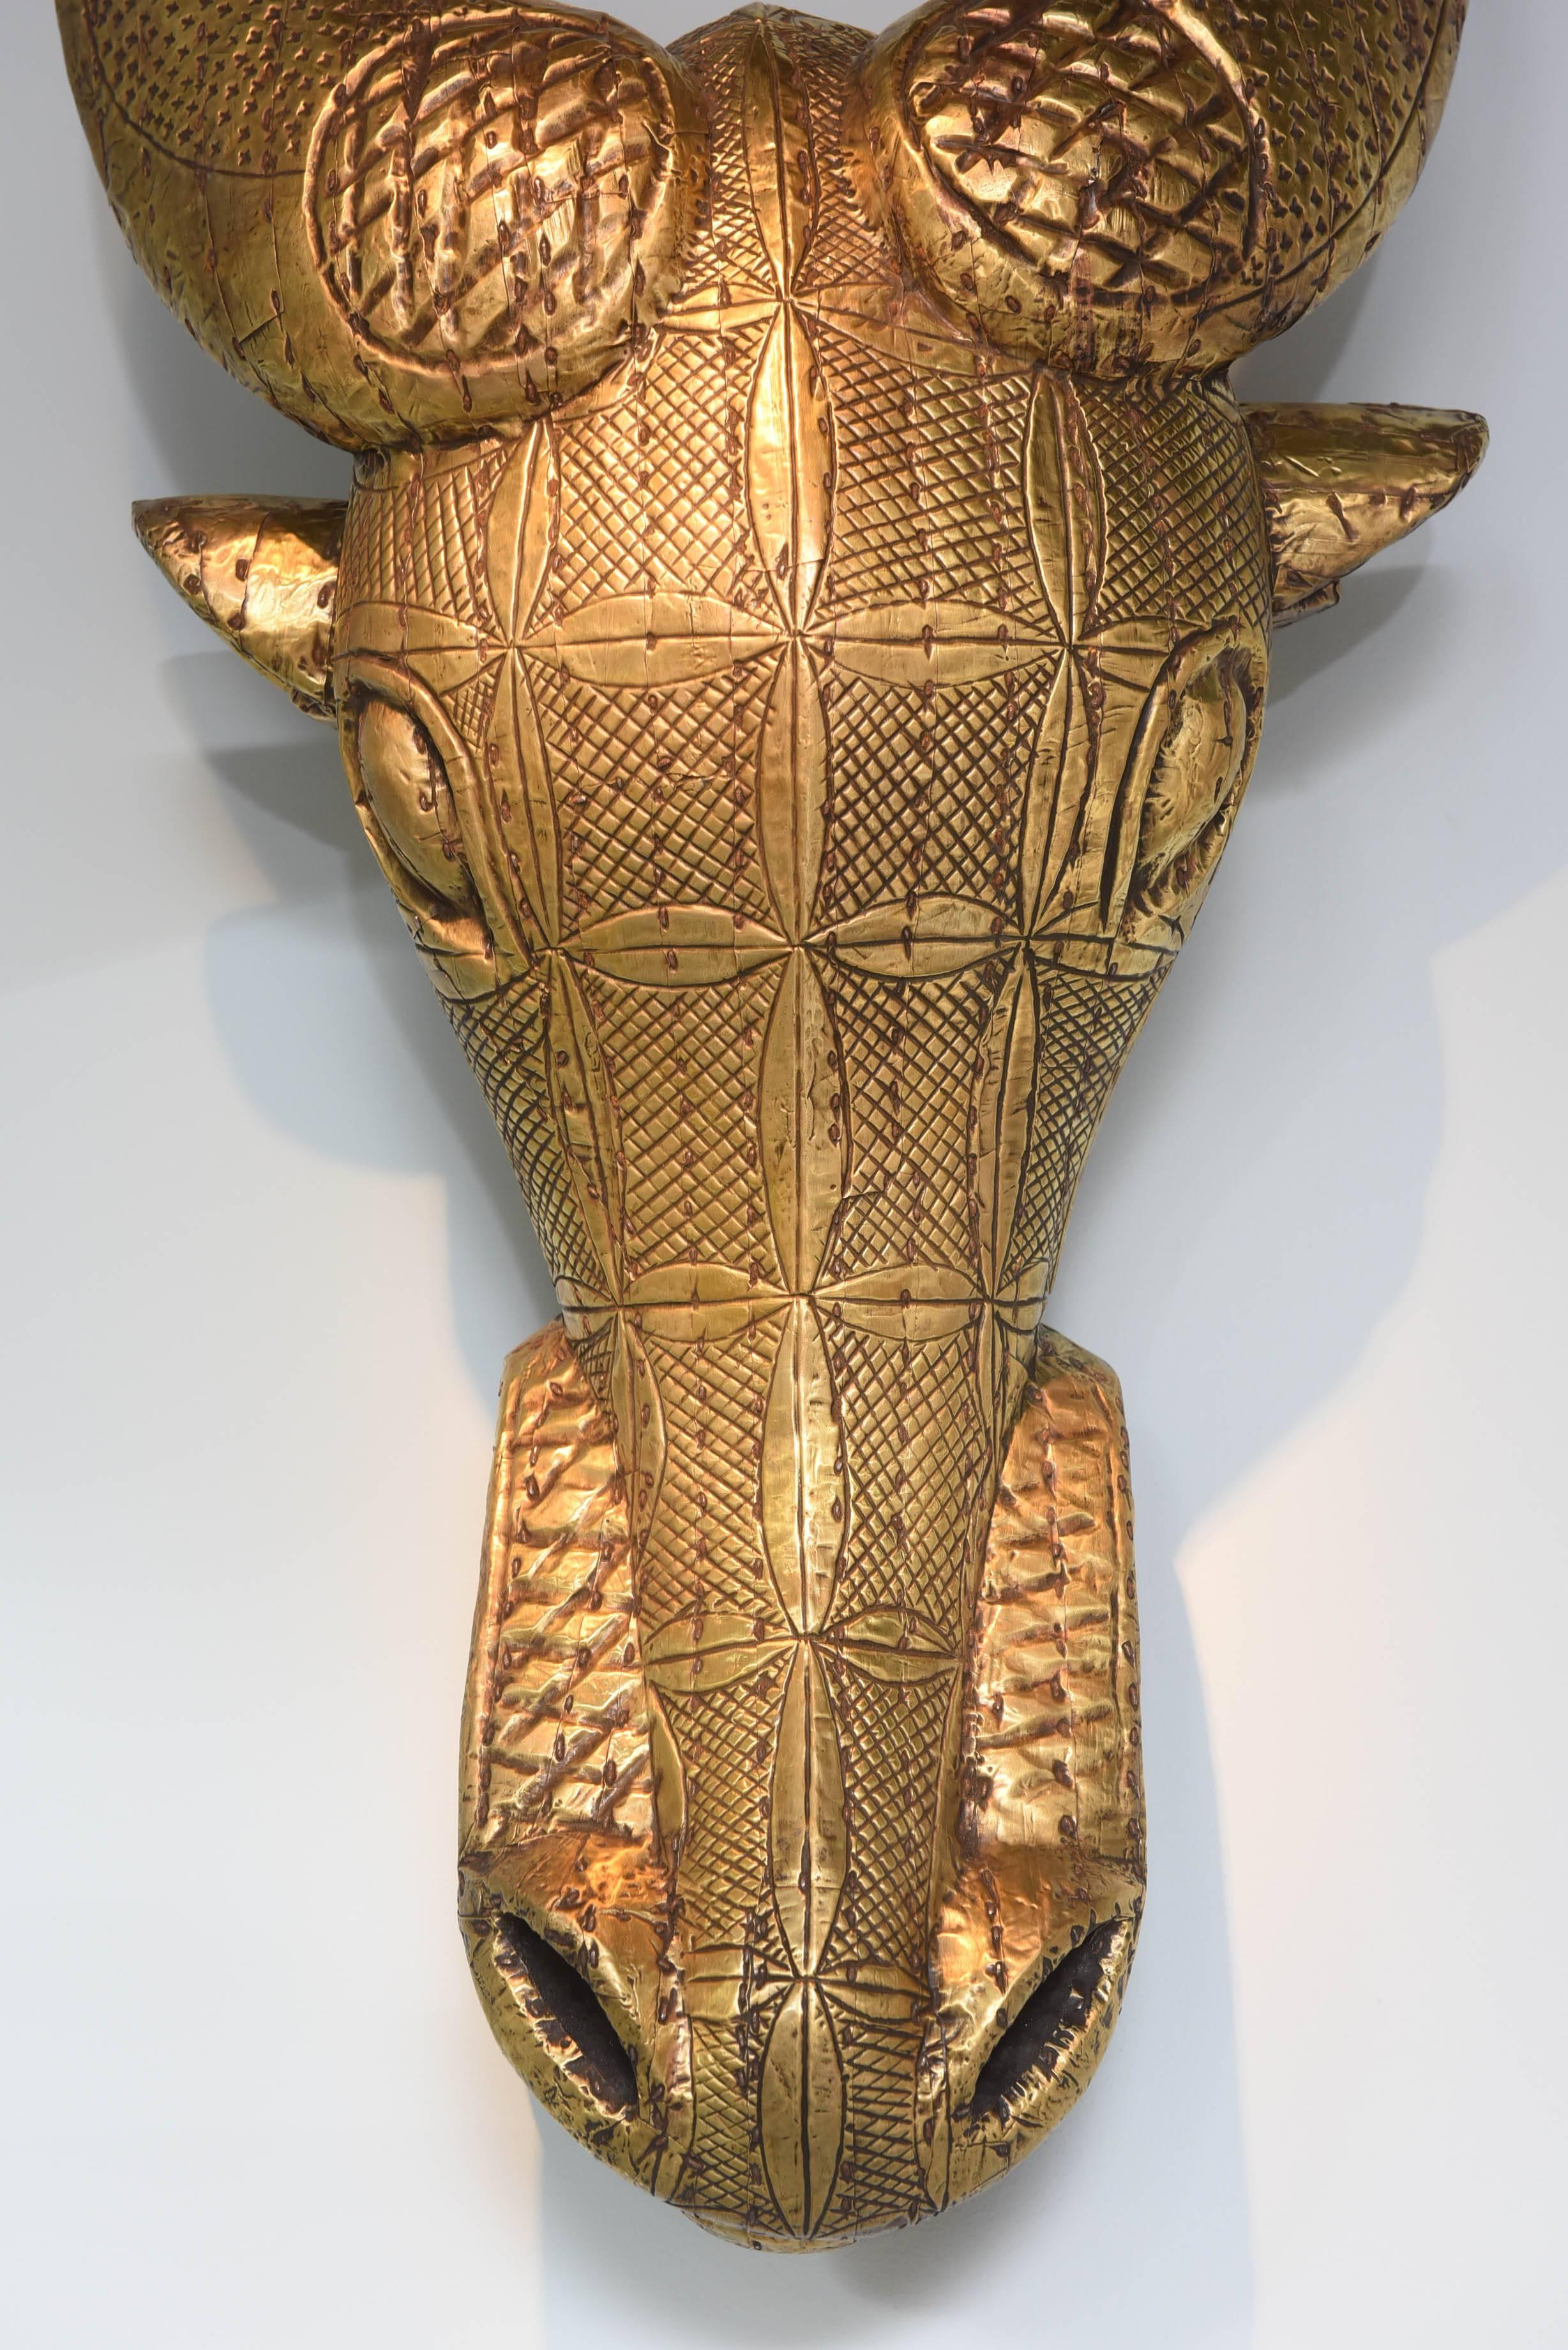 Mid-Century Modern Wall Sculpture, Gold, Huge, Animal Head, Woodcarving from Cameroon, Good Luck